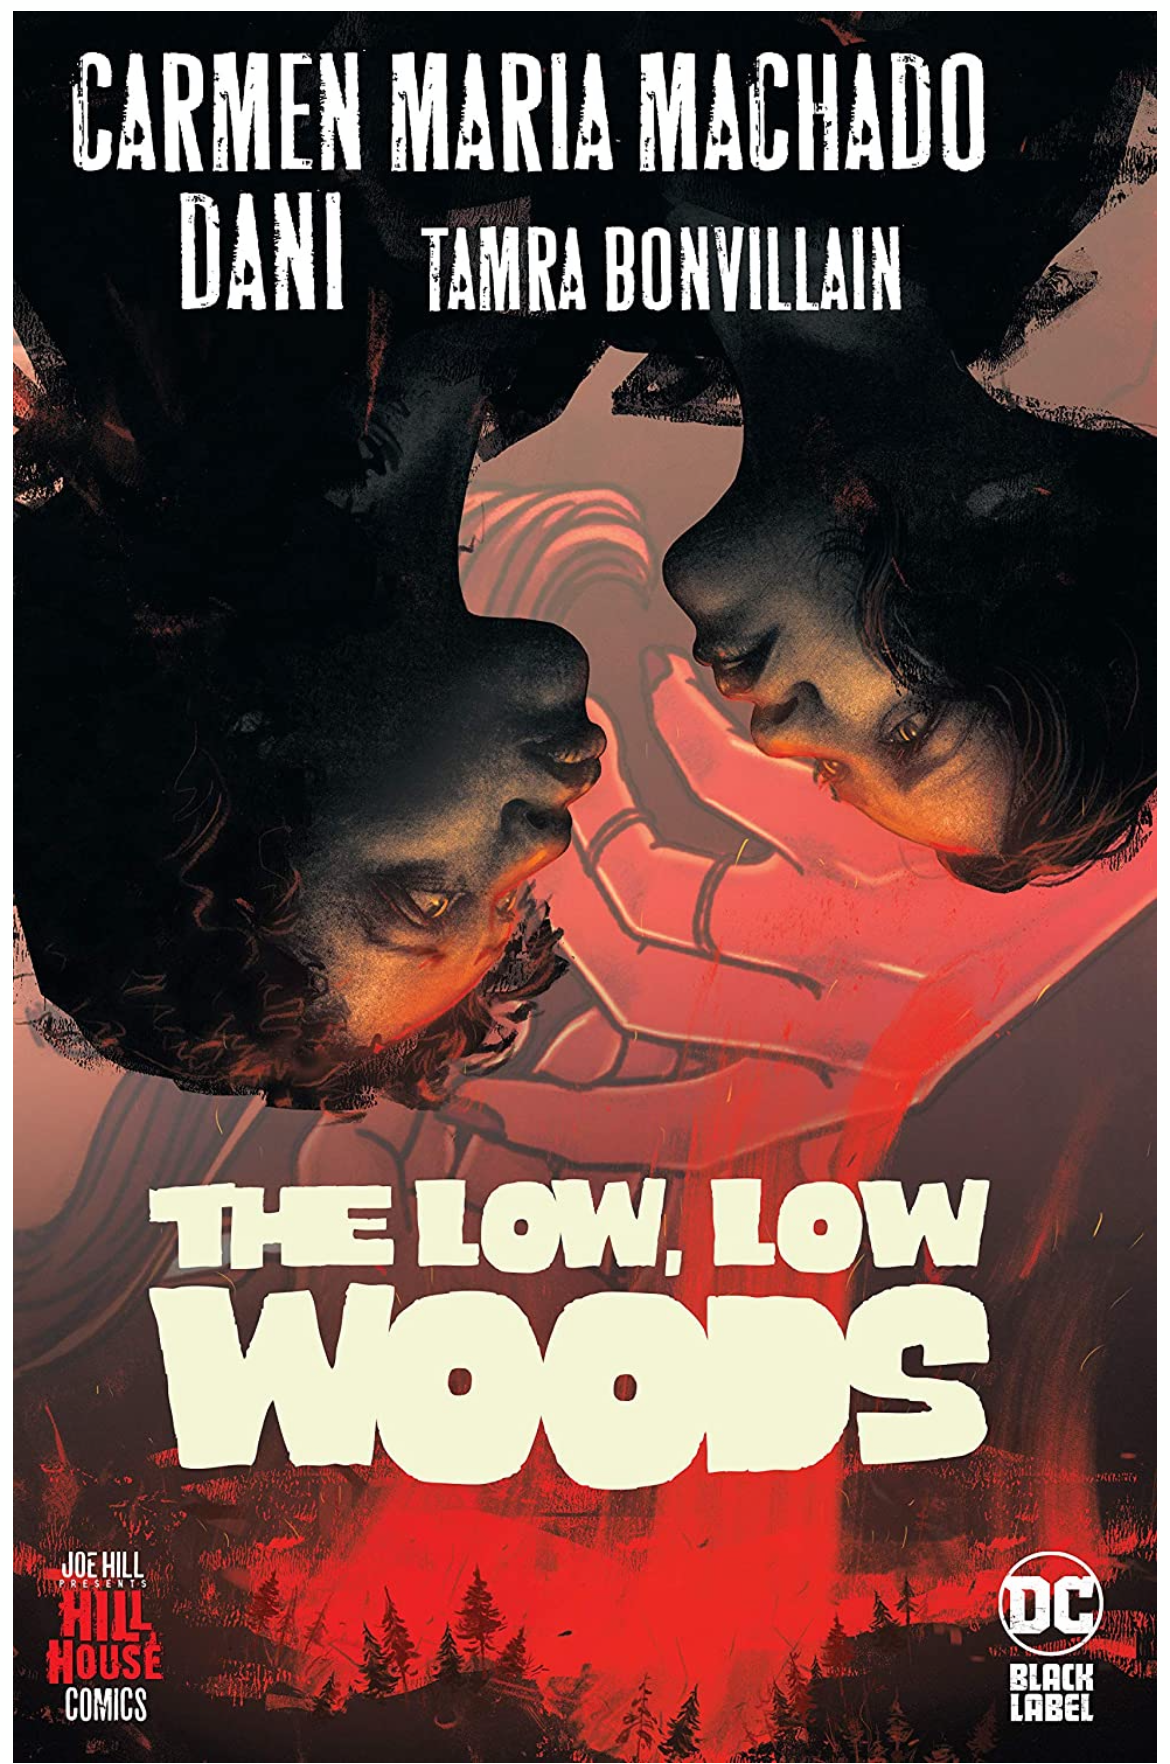 The Low Low Woods (Hill House Comics) - Hardcover